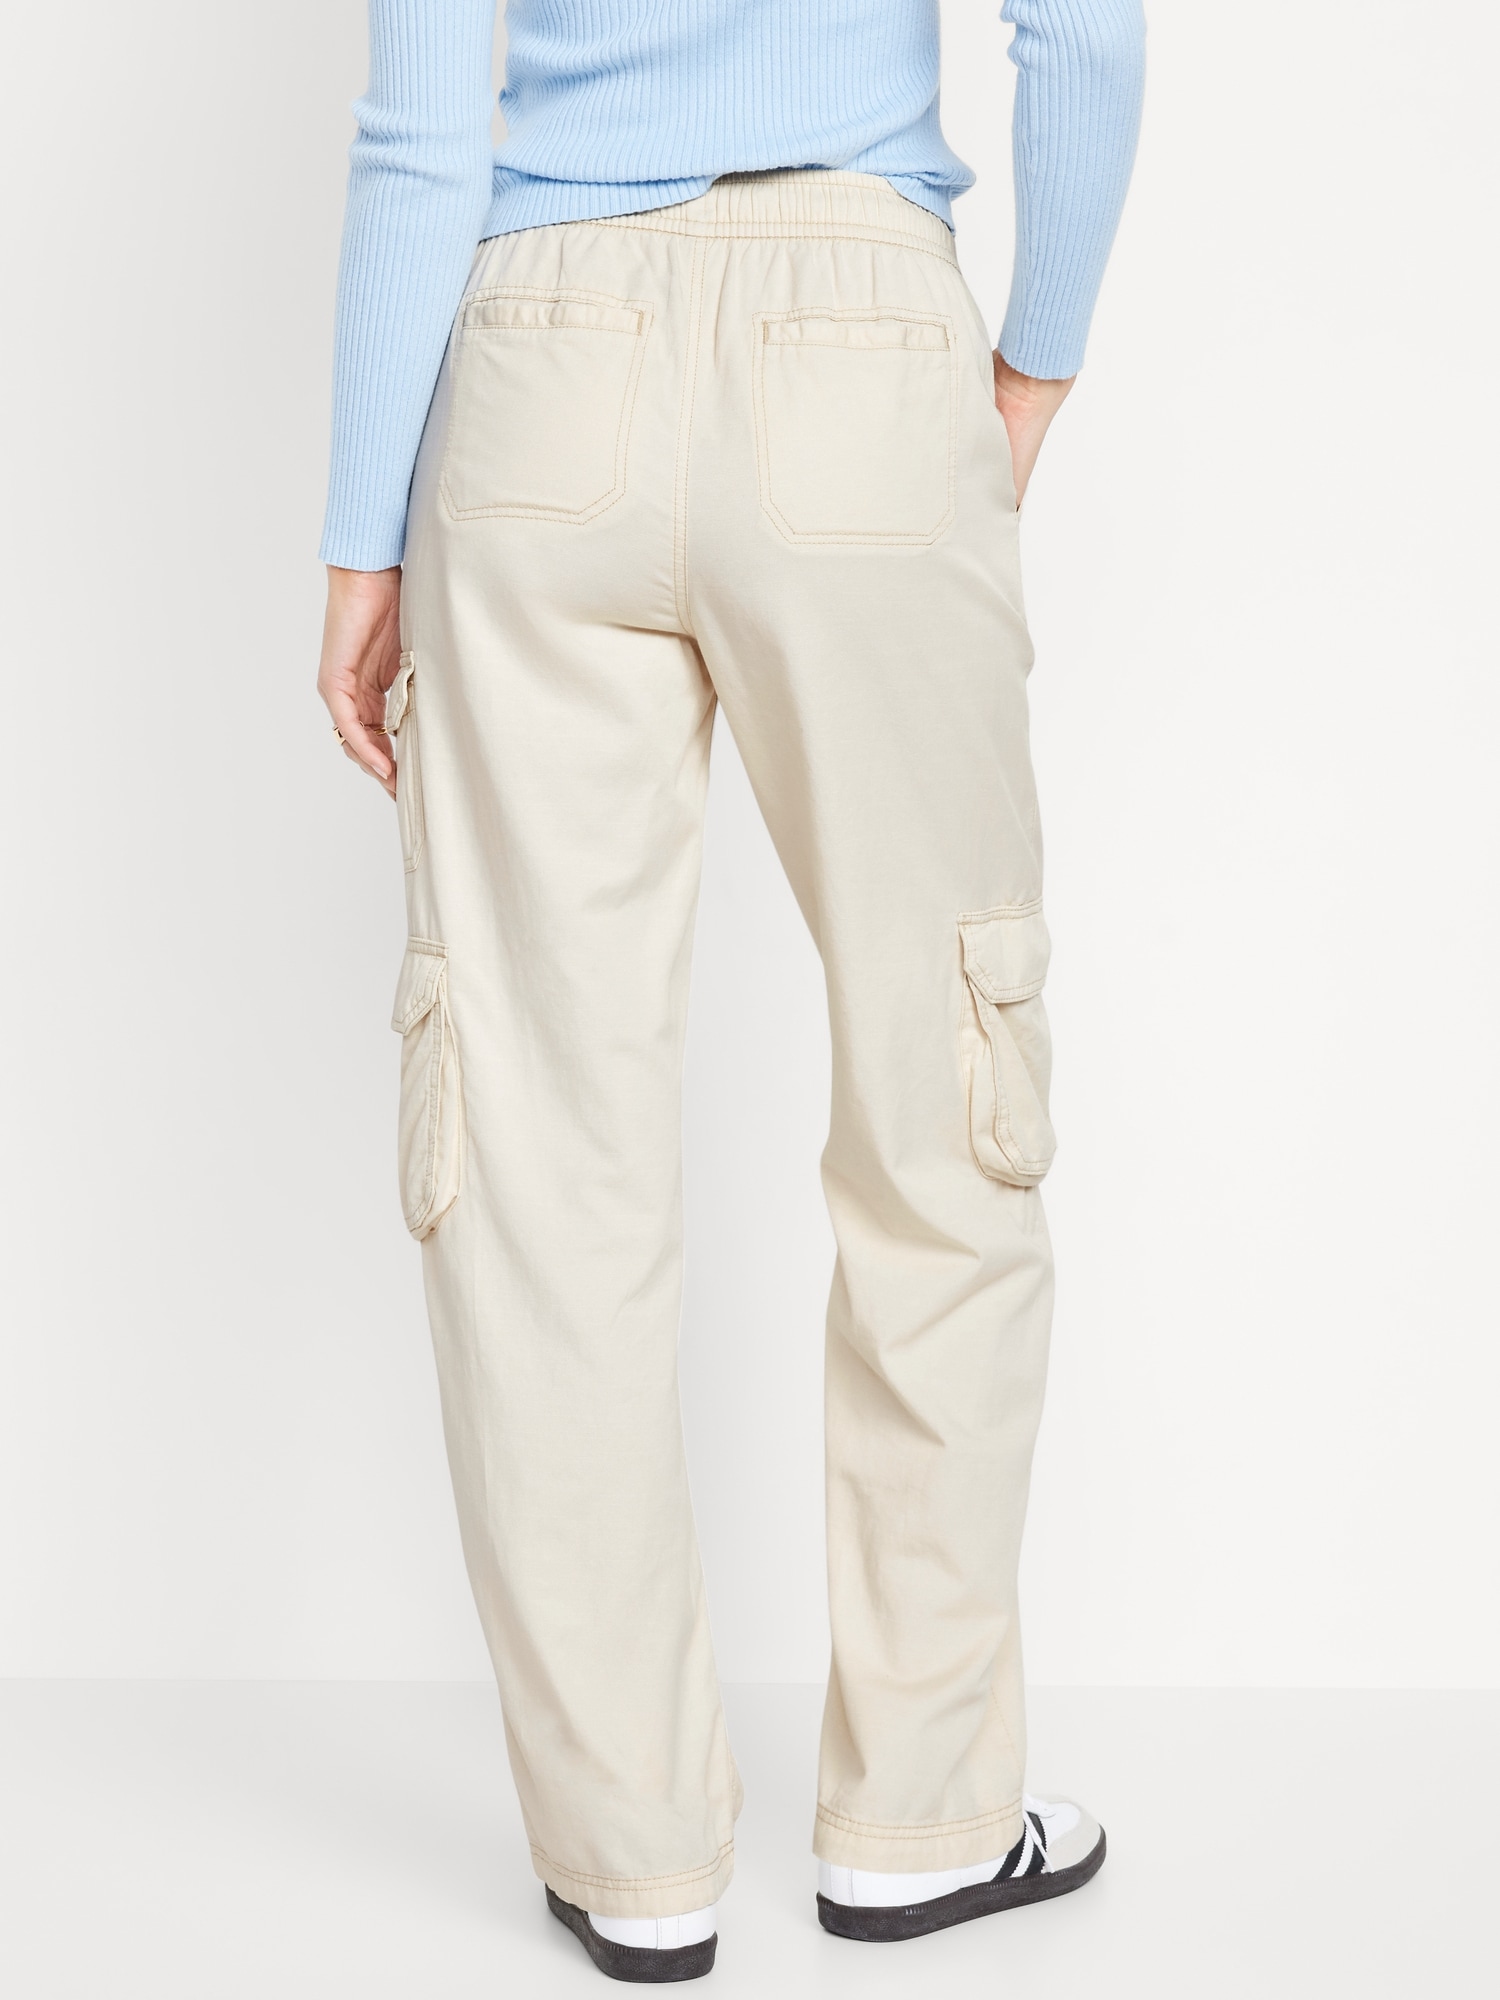 Women's High-rise Ankle Cargo Pants - A New Day™ Cream 3x : Target